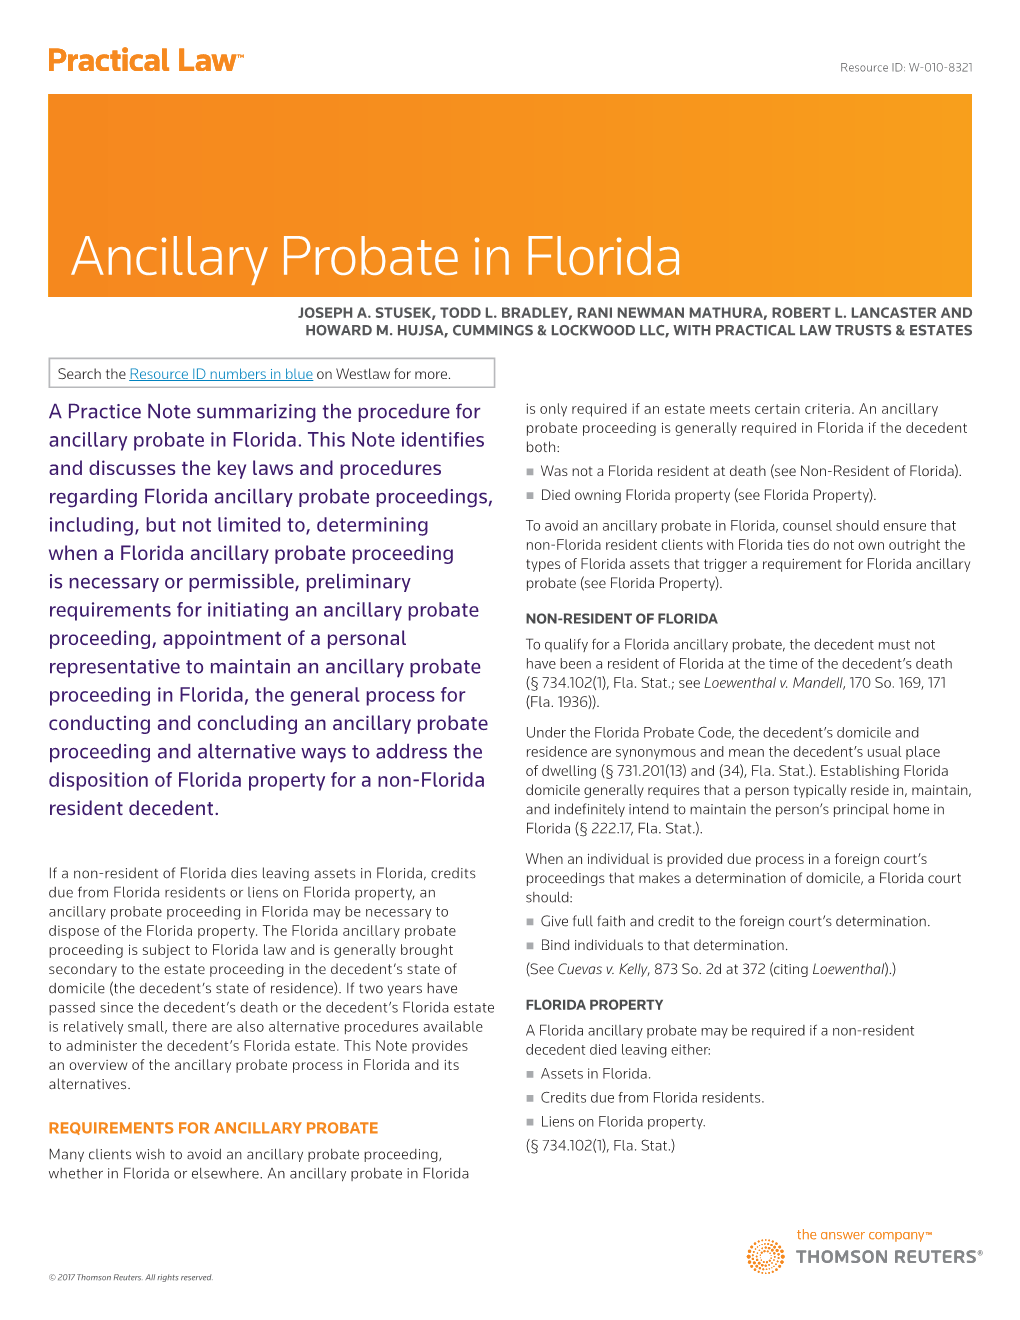 Ancillary Probate in Florida